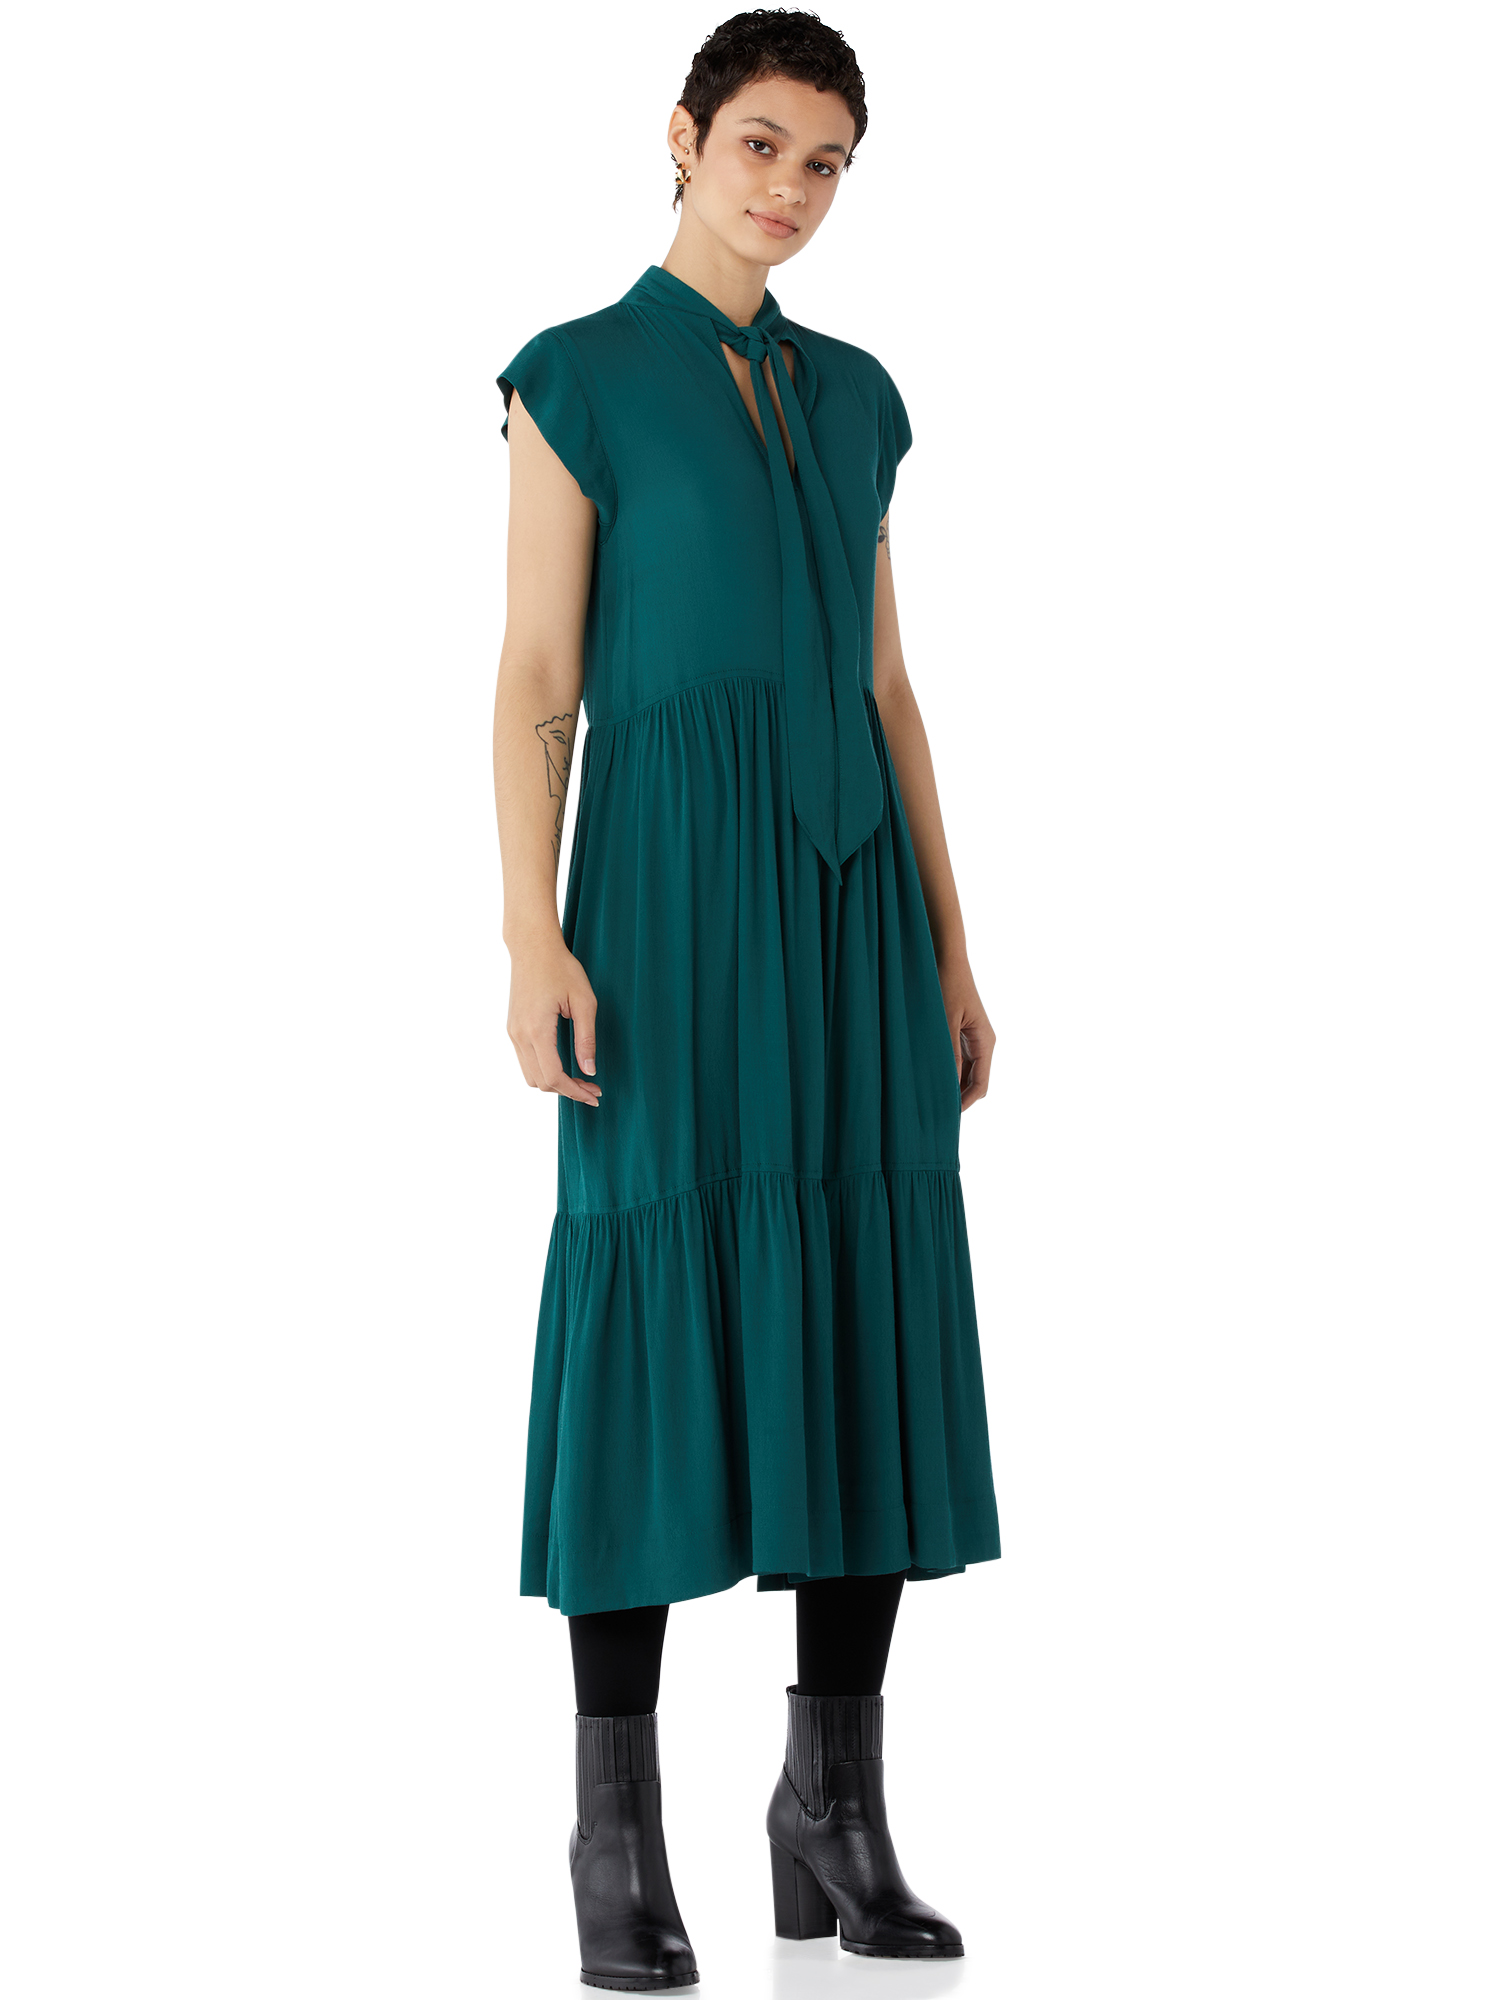 Free Assembly Women’s Sleeveless Tie Back Tiered Midi Dress - image 3 of 6